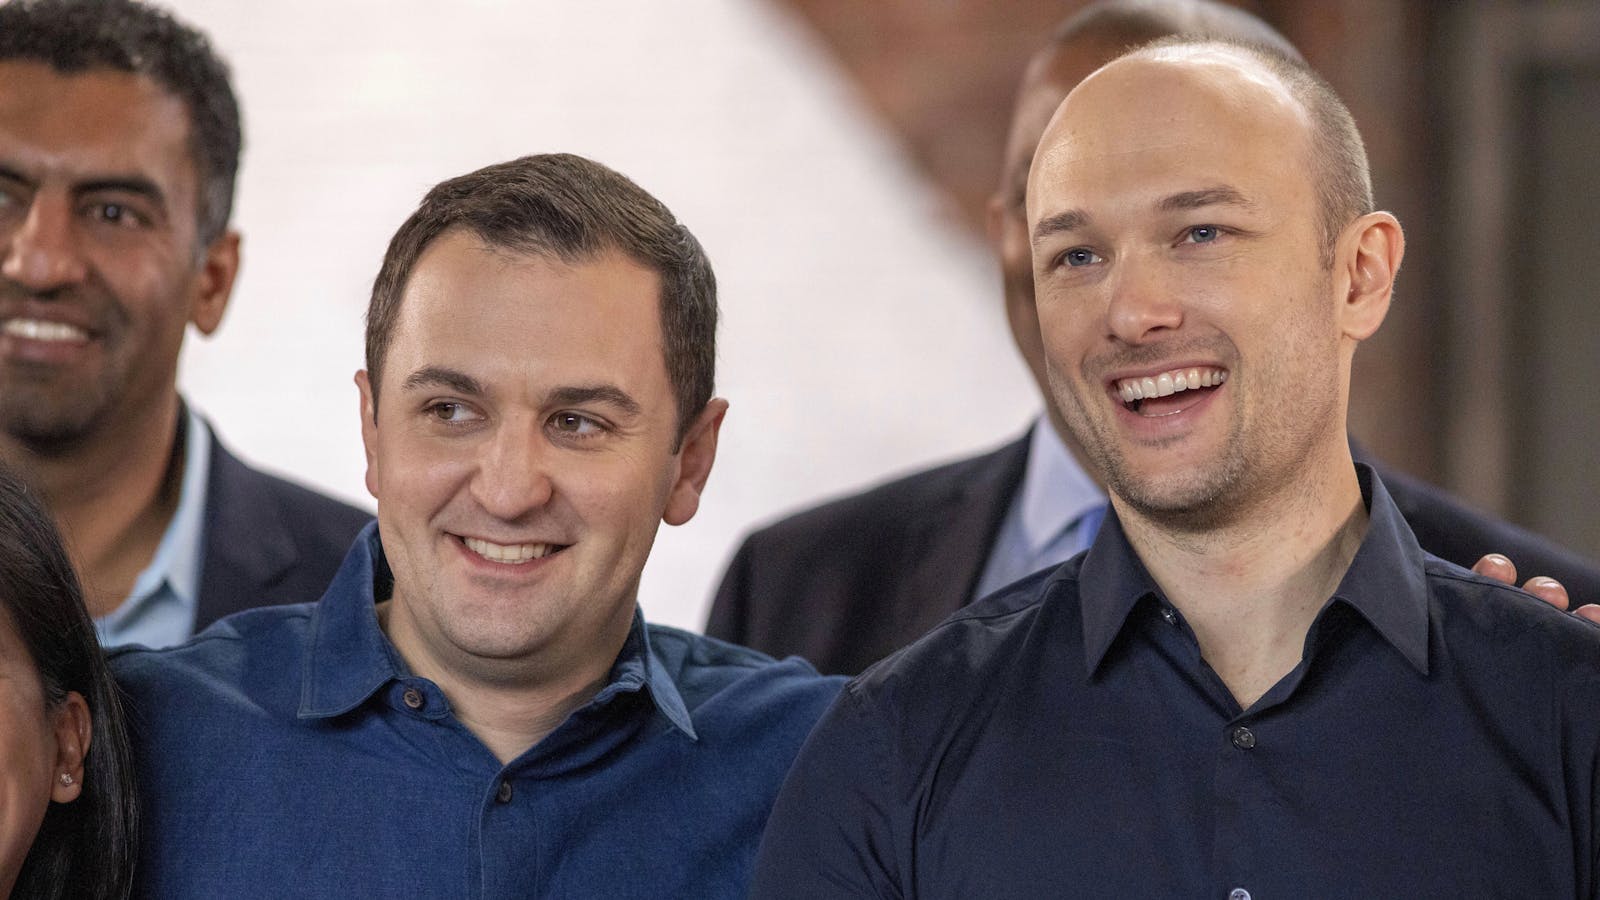 Lyft's co founders John Zimmer and Logan Green after the company's IPO last Friday. Photo by Bloomberg.